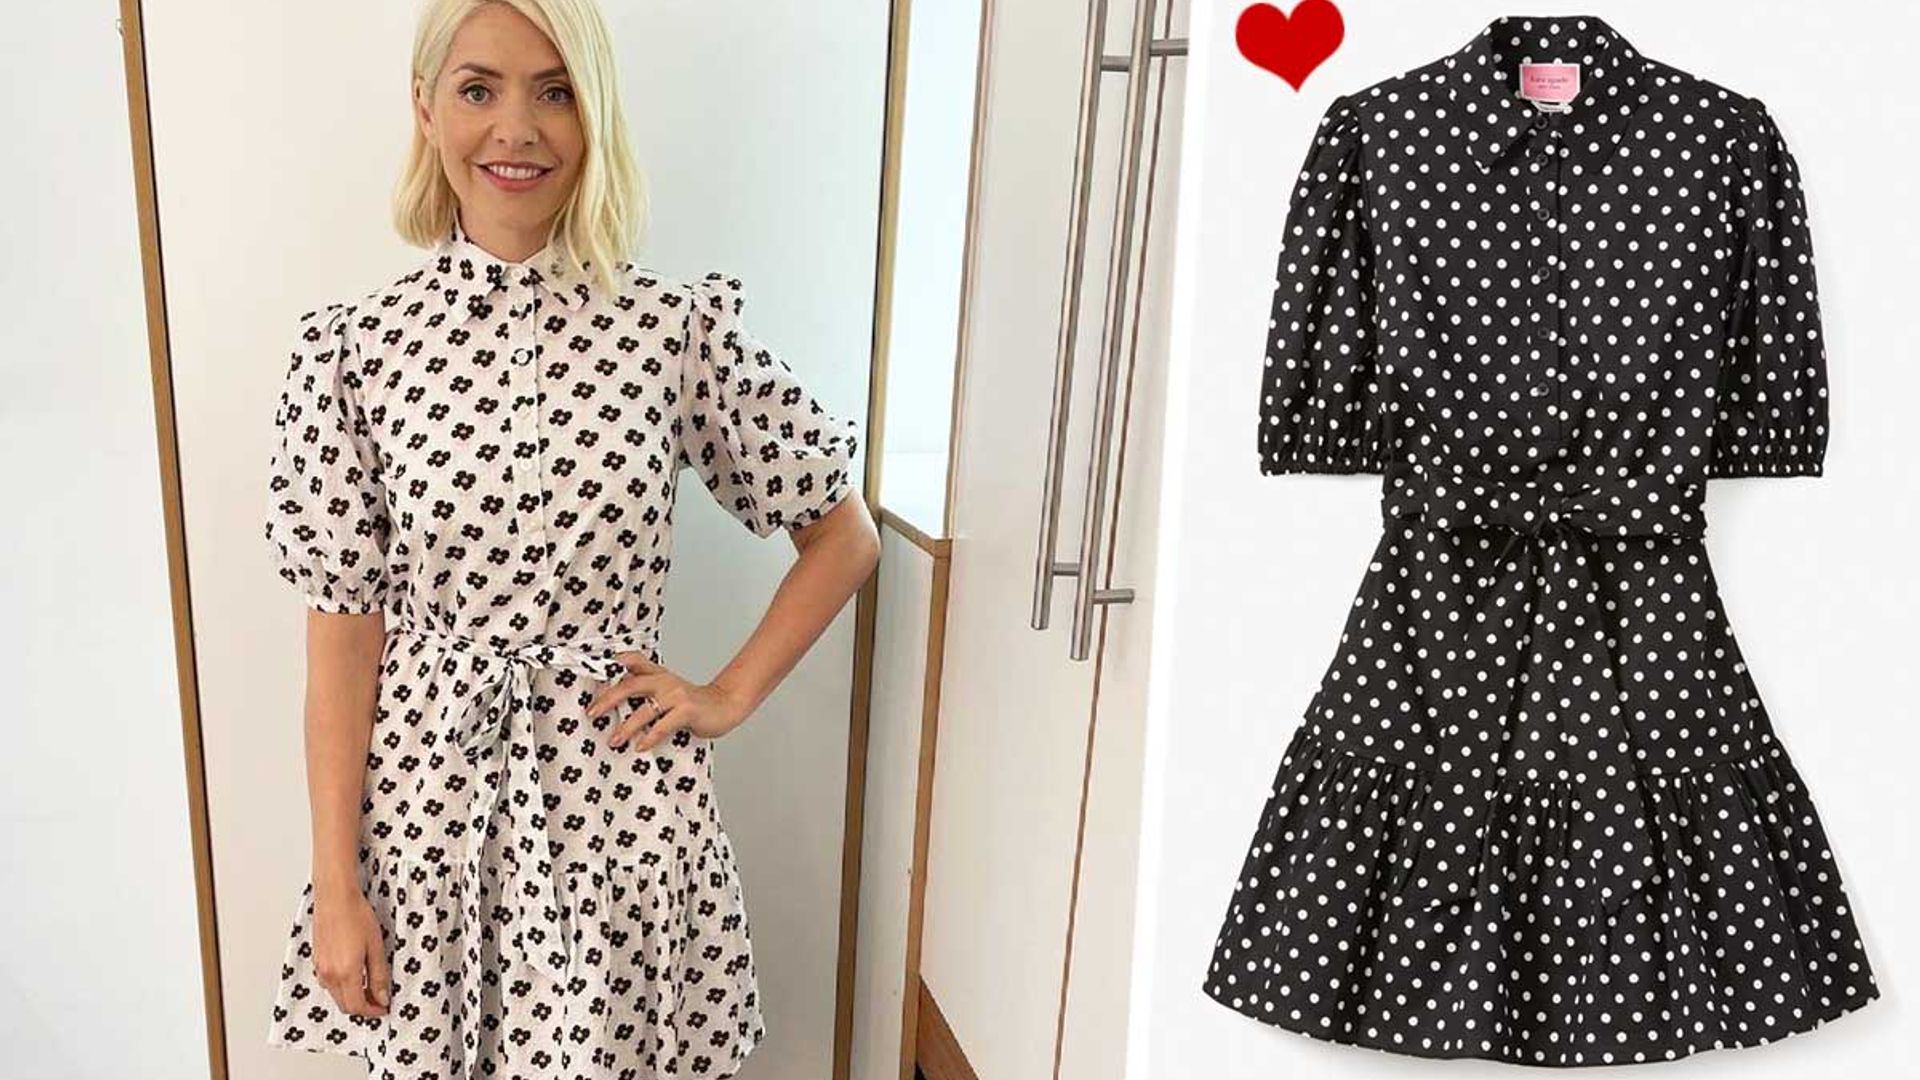 Holly Willoughby loves a shirt dress - and her floral mini just got a glow up for spring